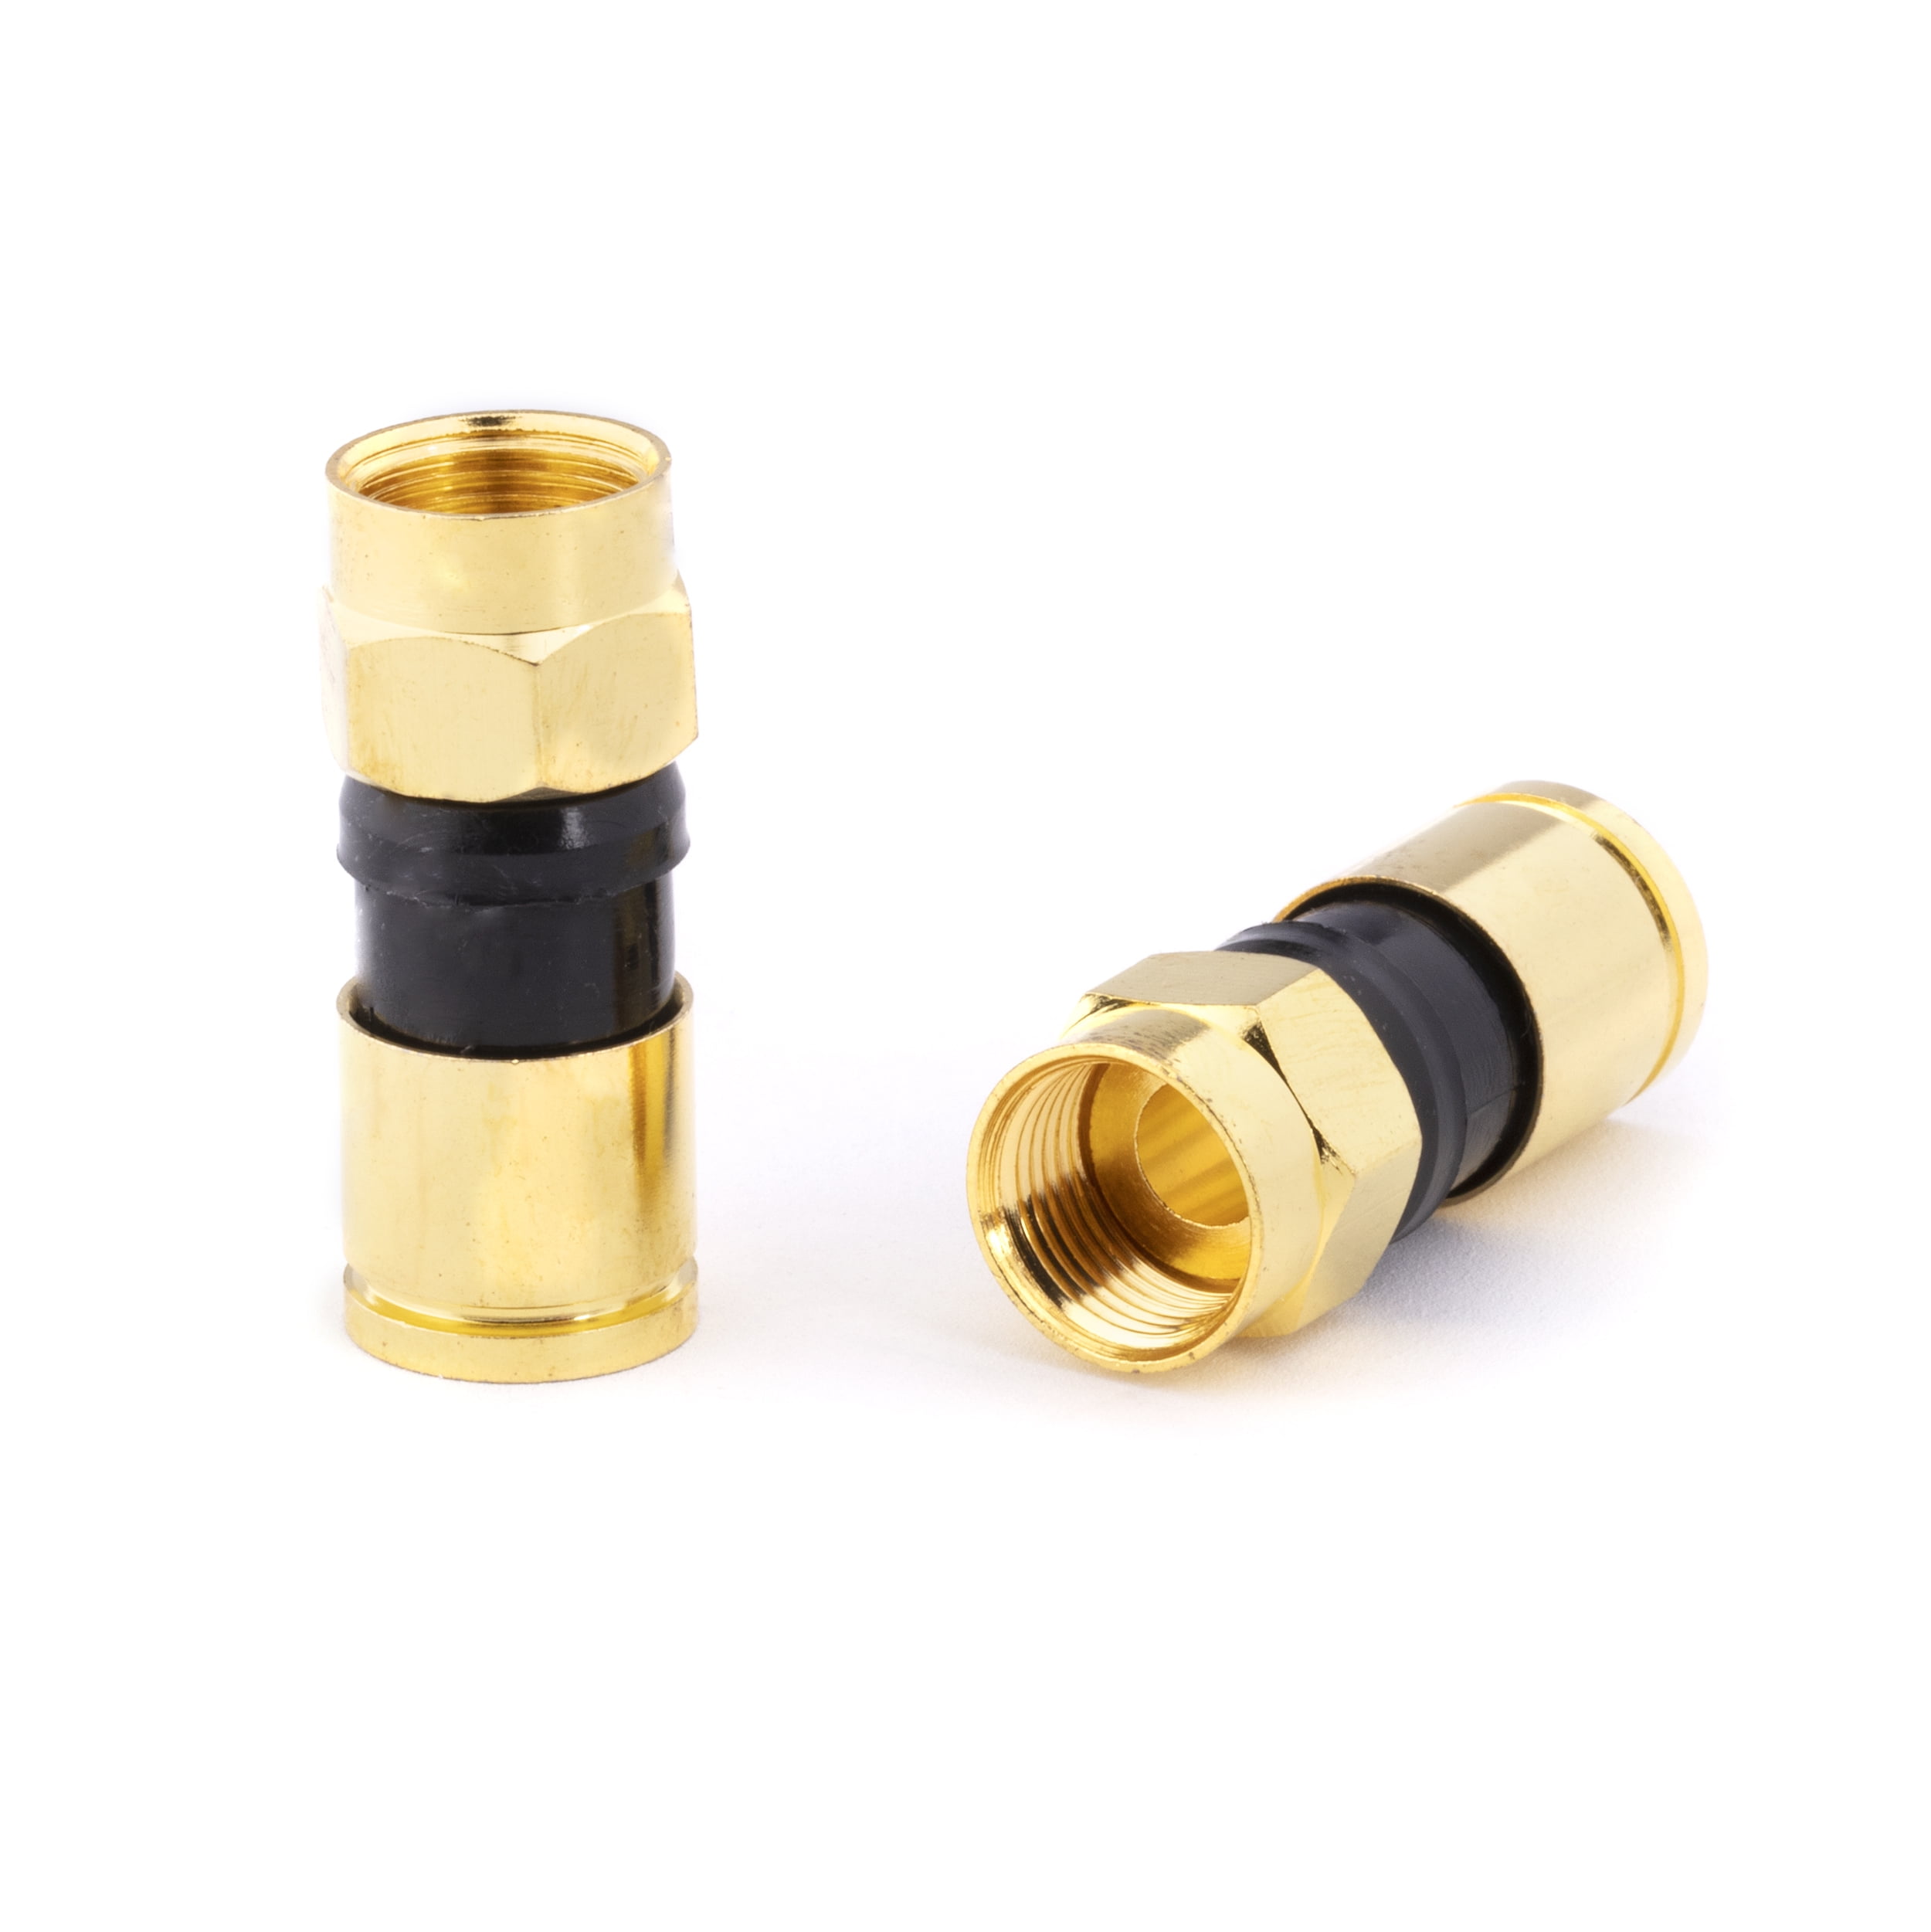 F-Type Connector with Crimp on Ring RG59U Coaxial Adapter Plugs GOLD 100 Pack 